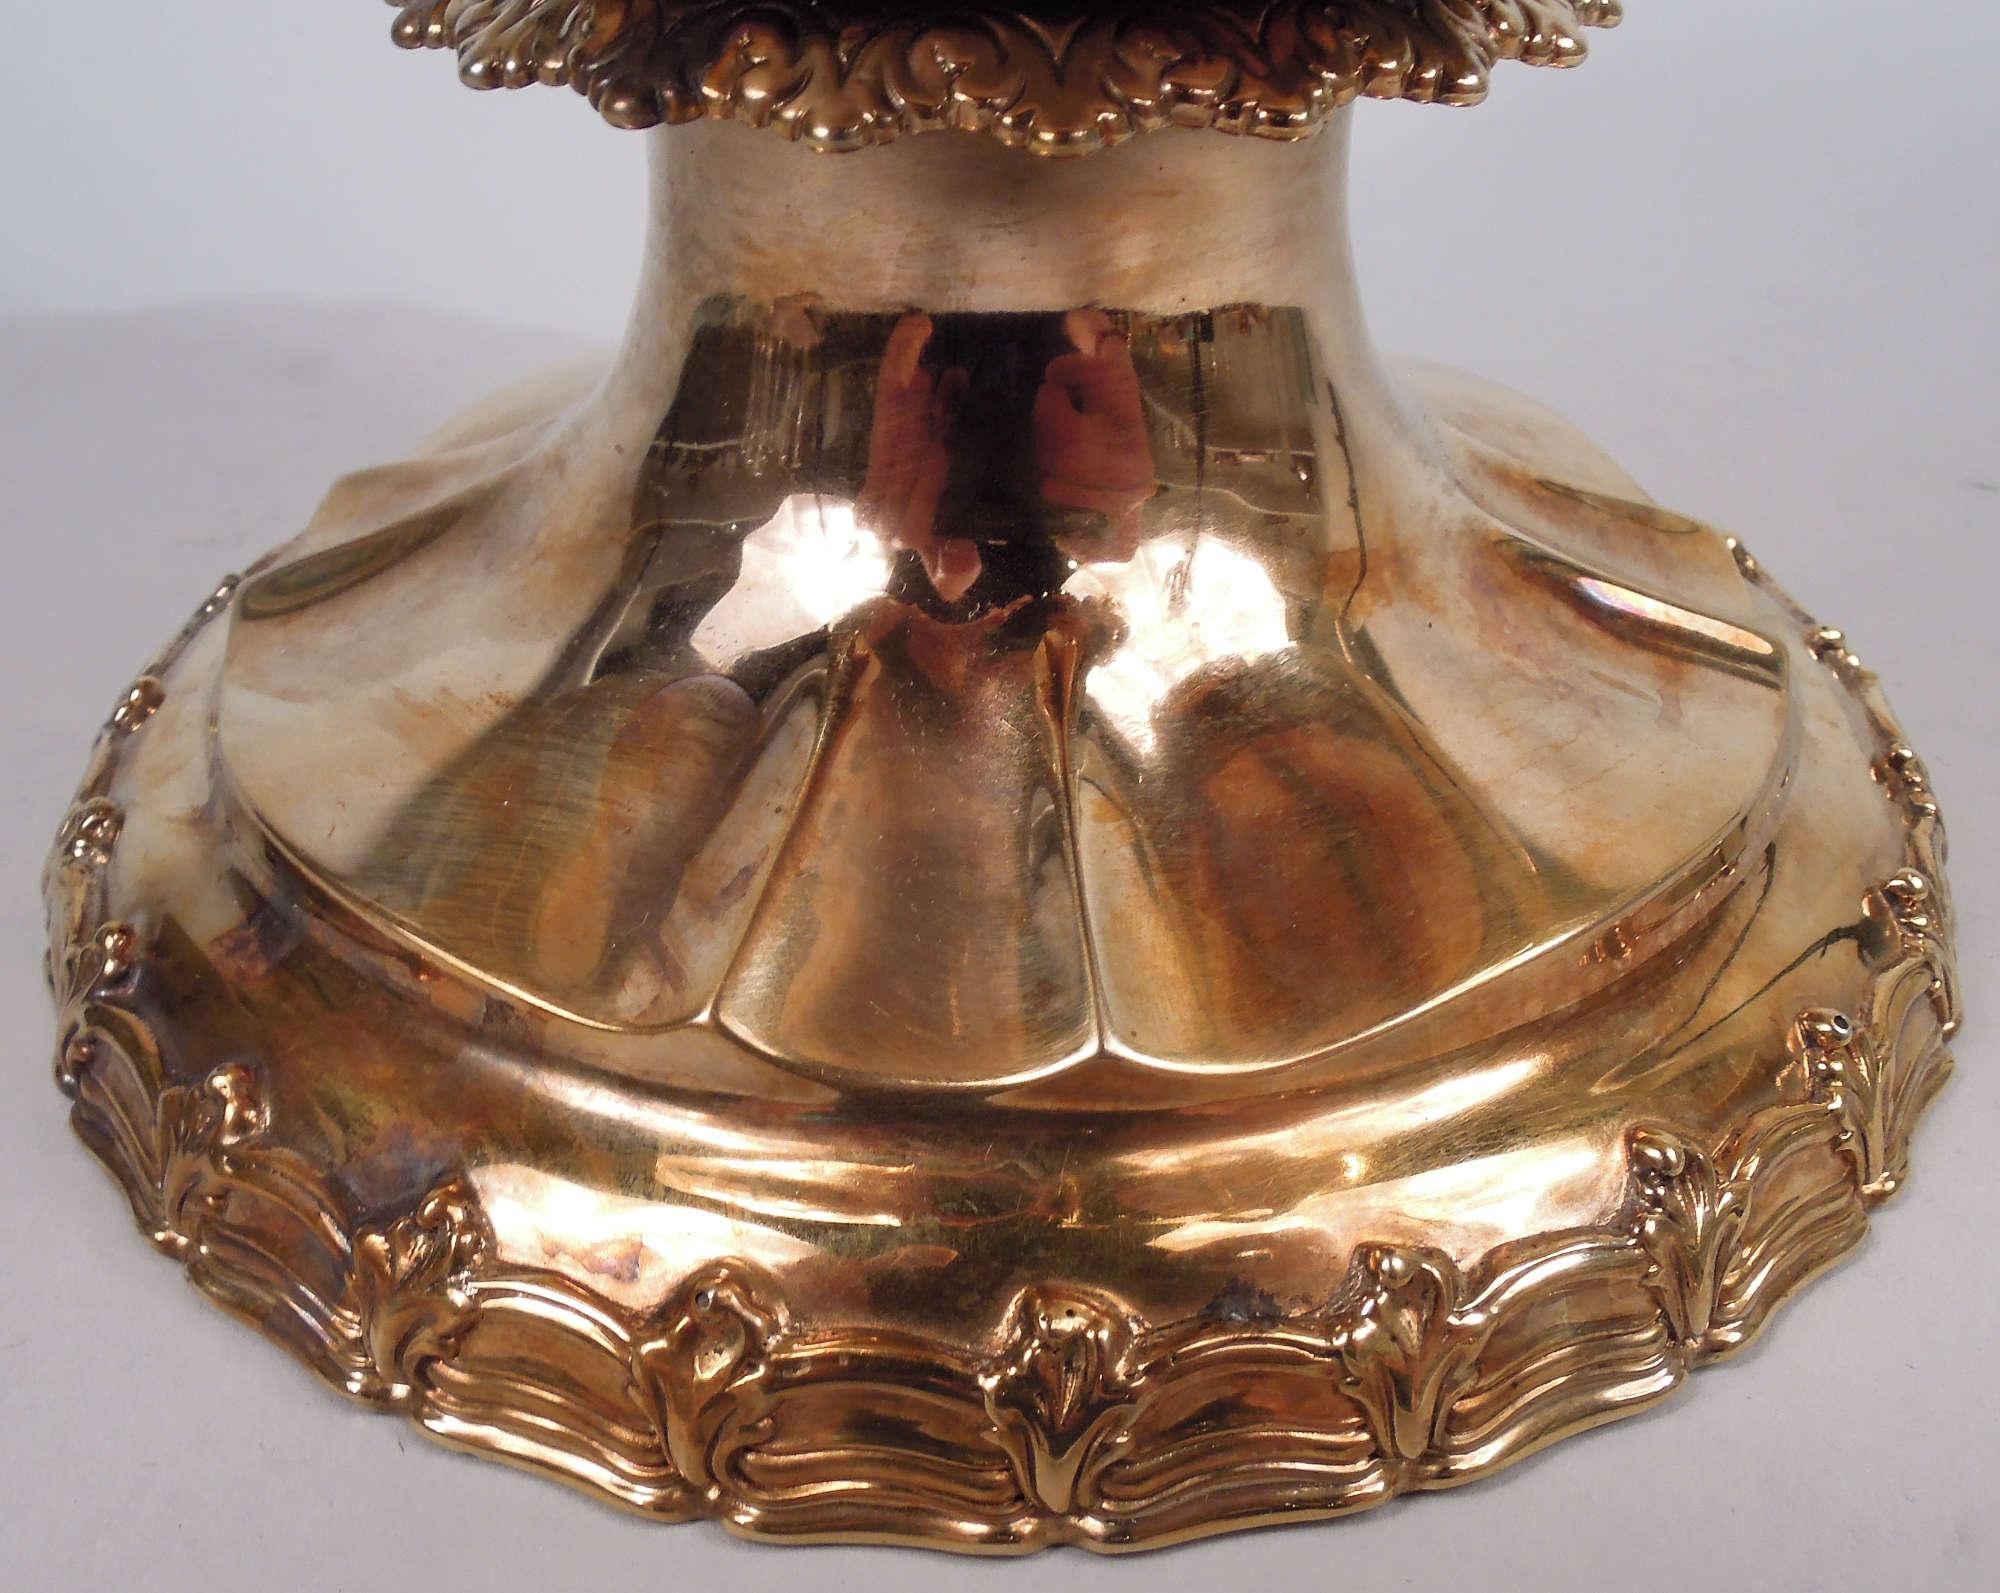 Sumptuous Tiffany Edwardian Classical Silver Gilt Urn Vase For Sale 4